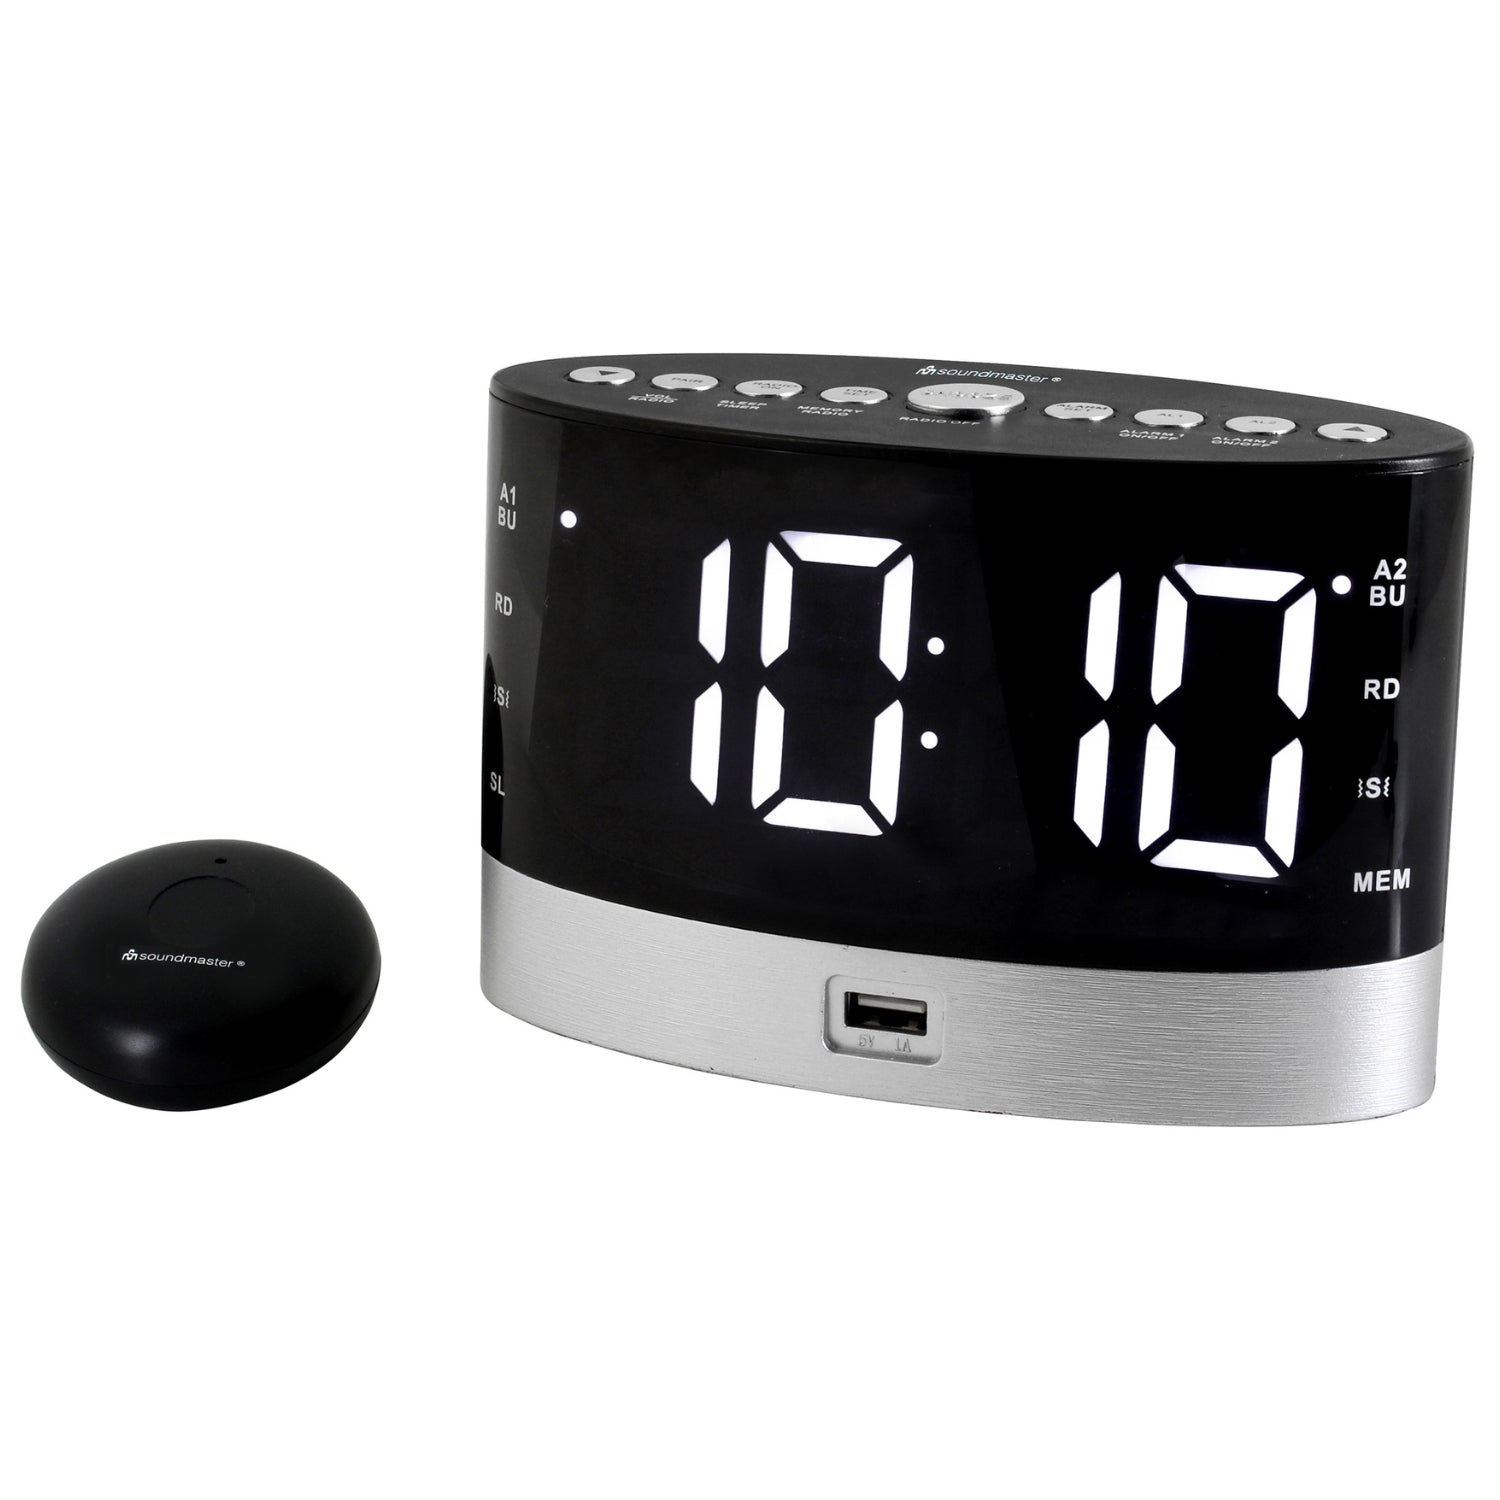 Soundmaster UR580SW FM radio alarm clock for the hearing impaired with cordless vibration pillow